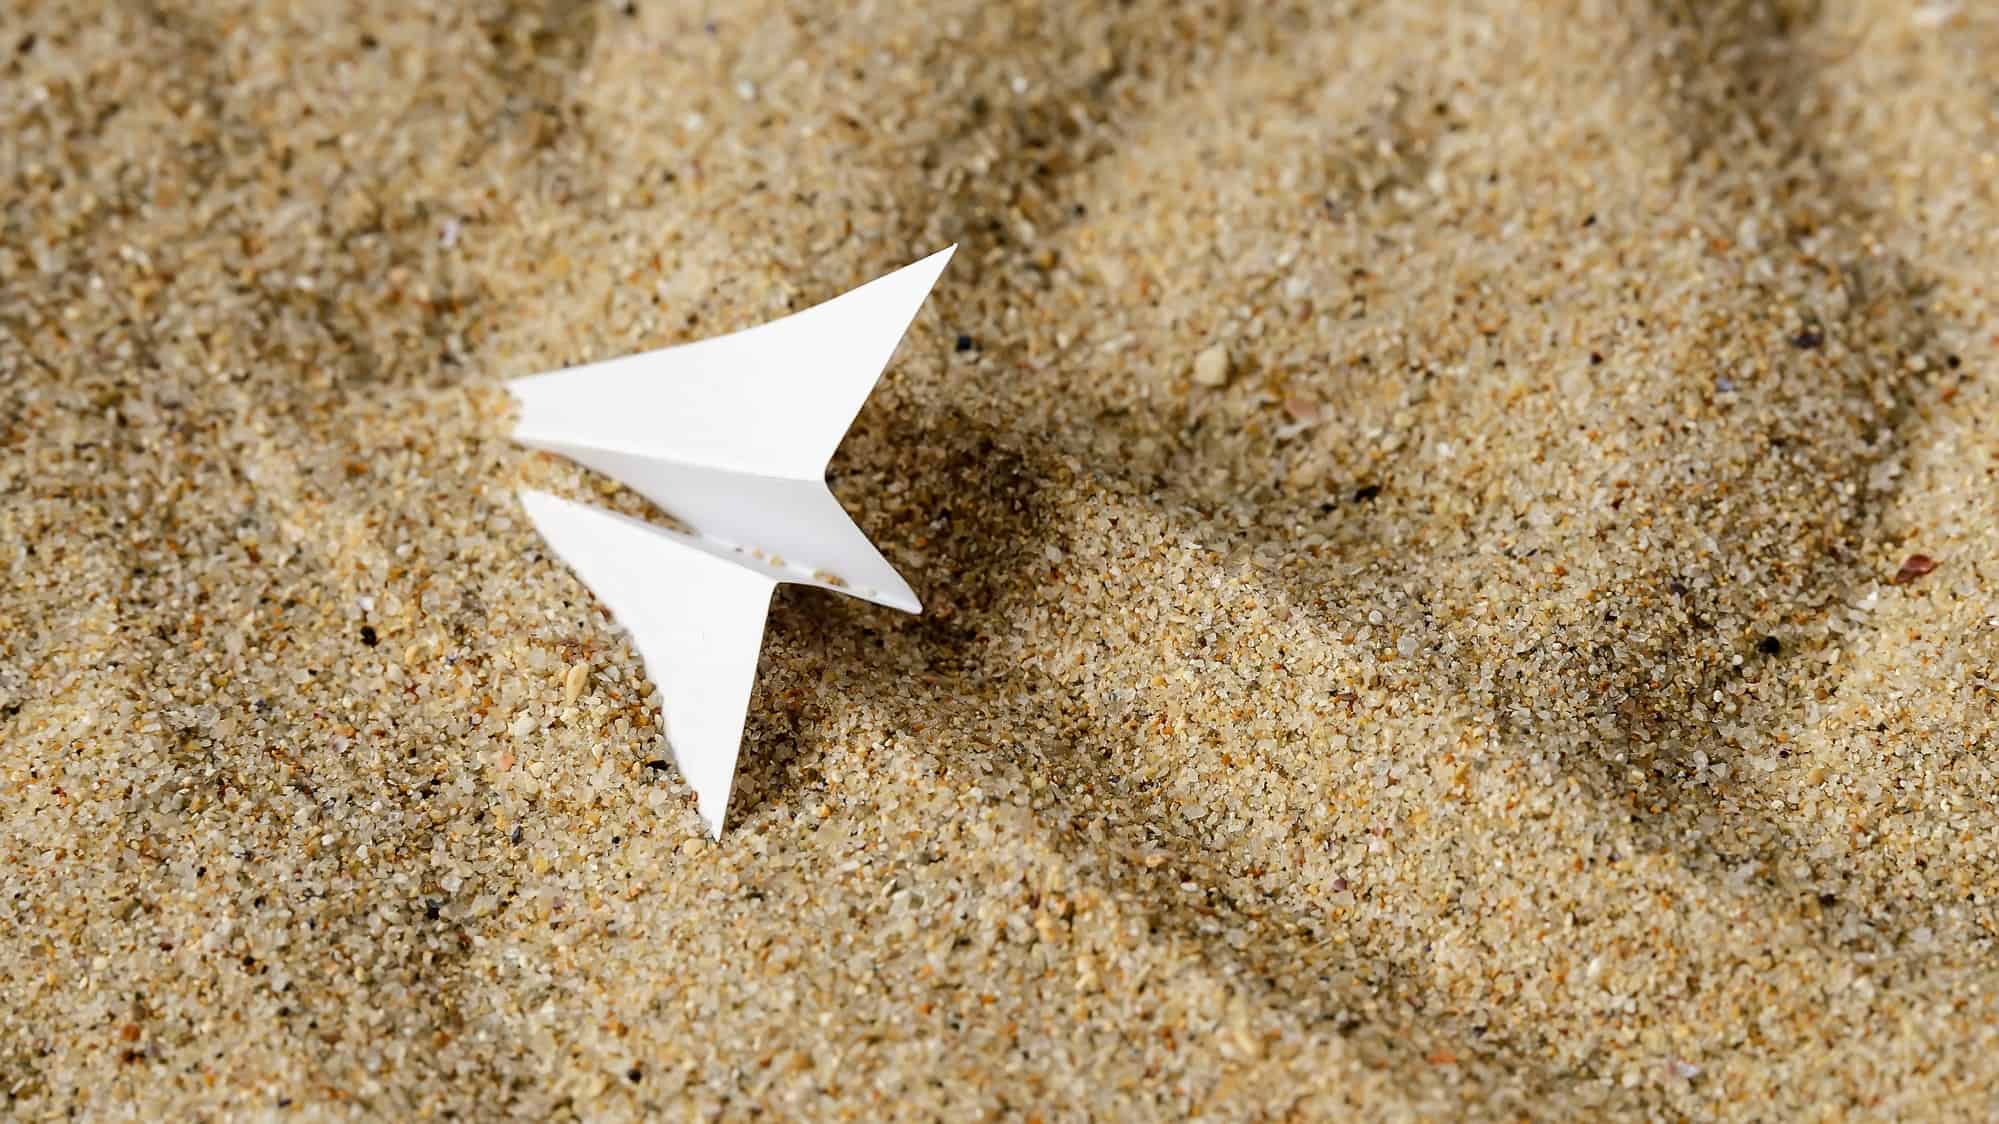 A paper plane crashed in sand.